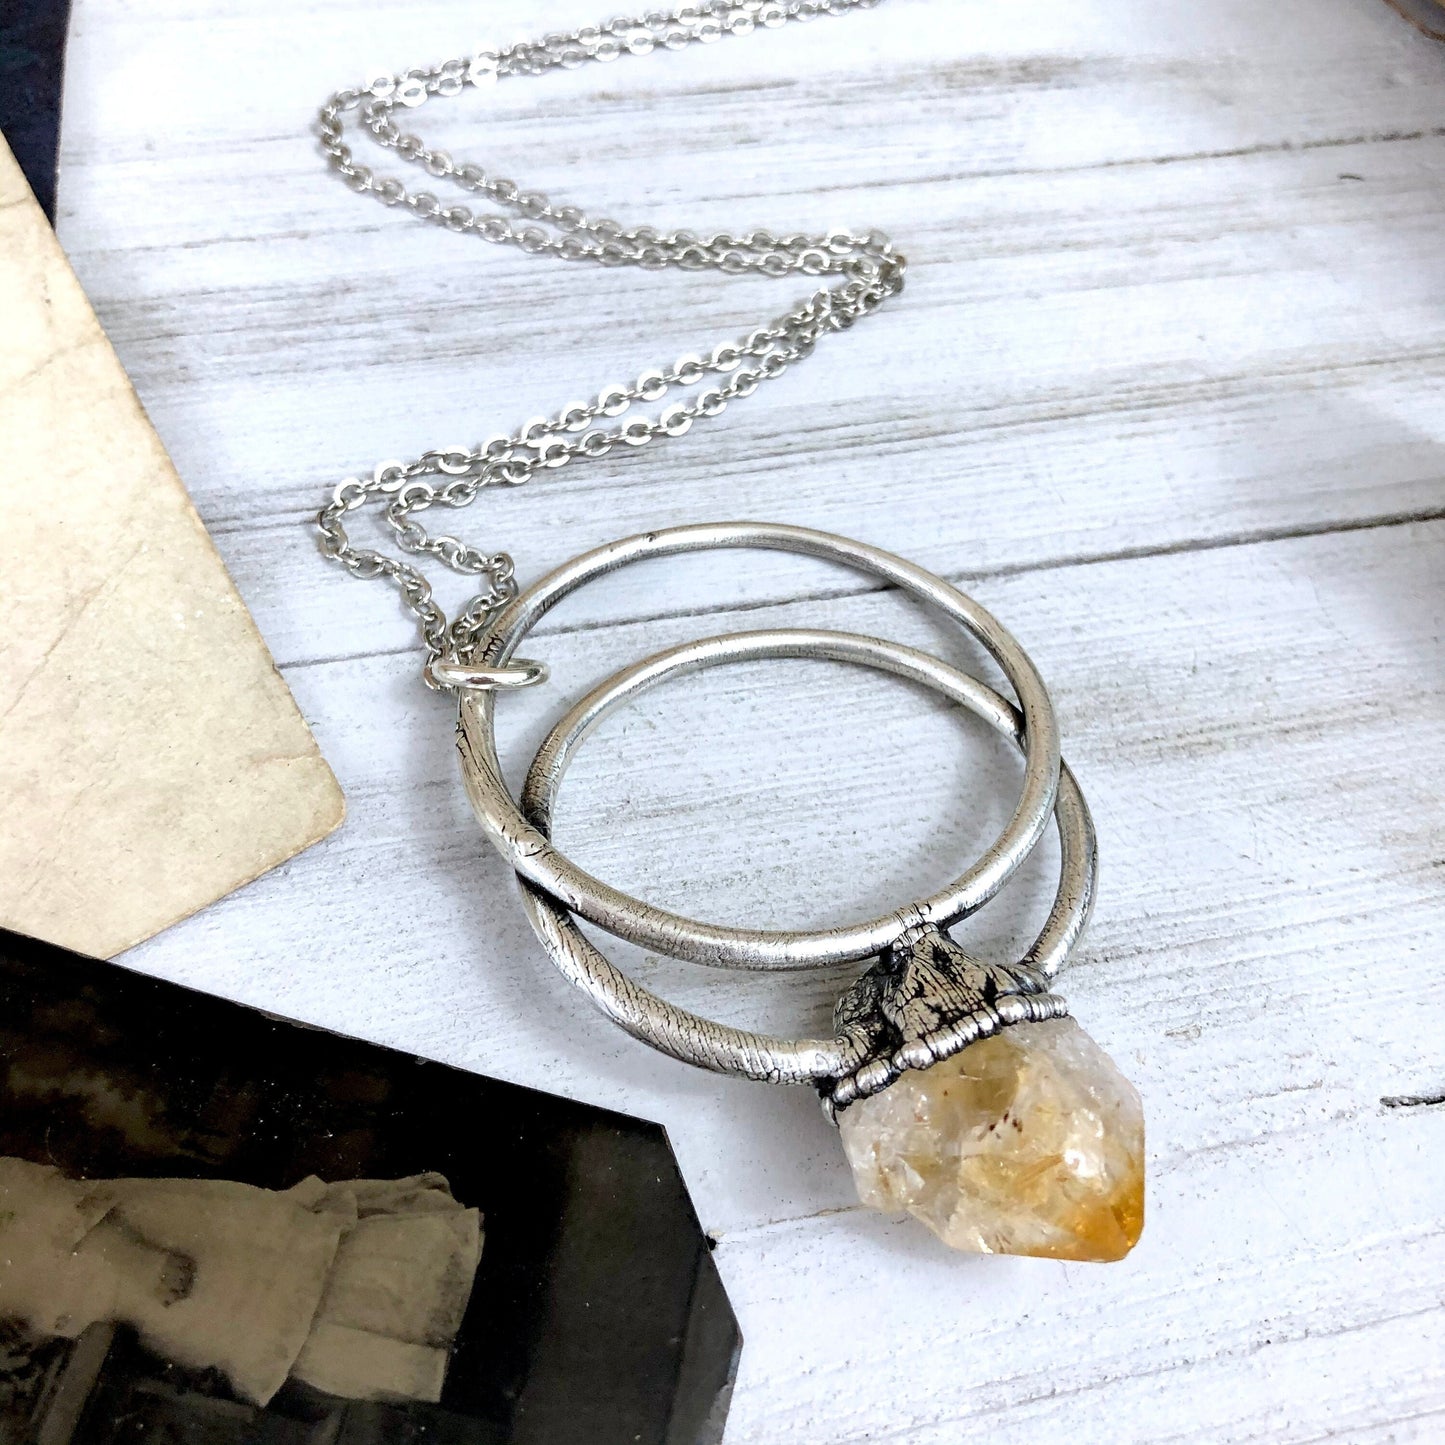 Large Raw Citrine Necklace / Big Crystal Necklace Silver / Natural Crystal Jewelry Citrine Birthstone Jewelry